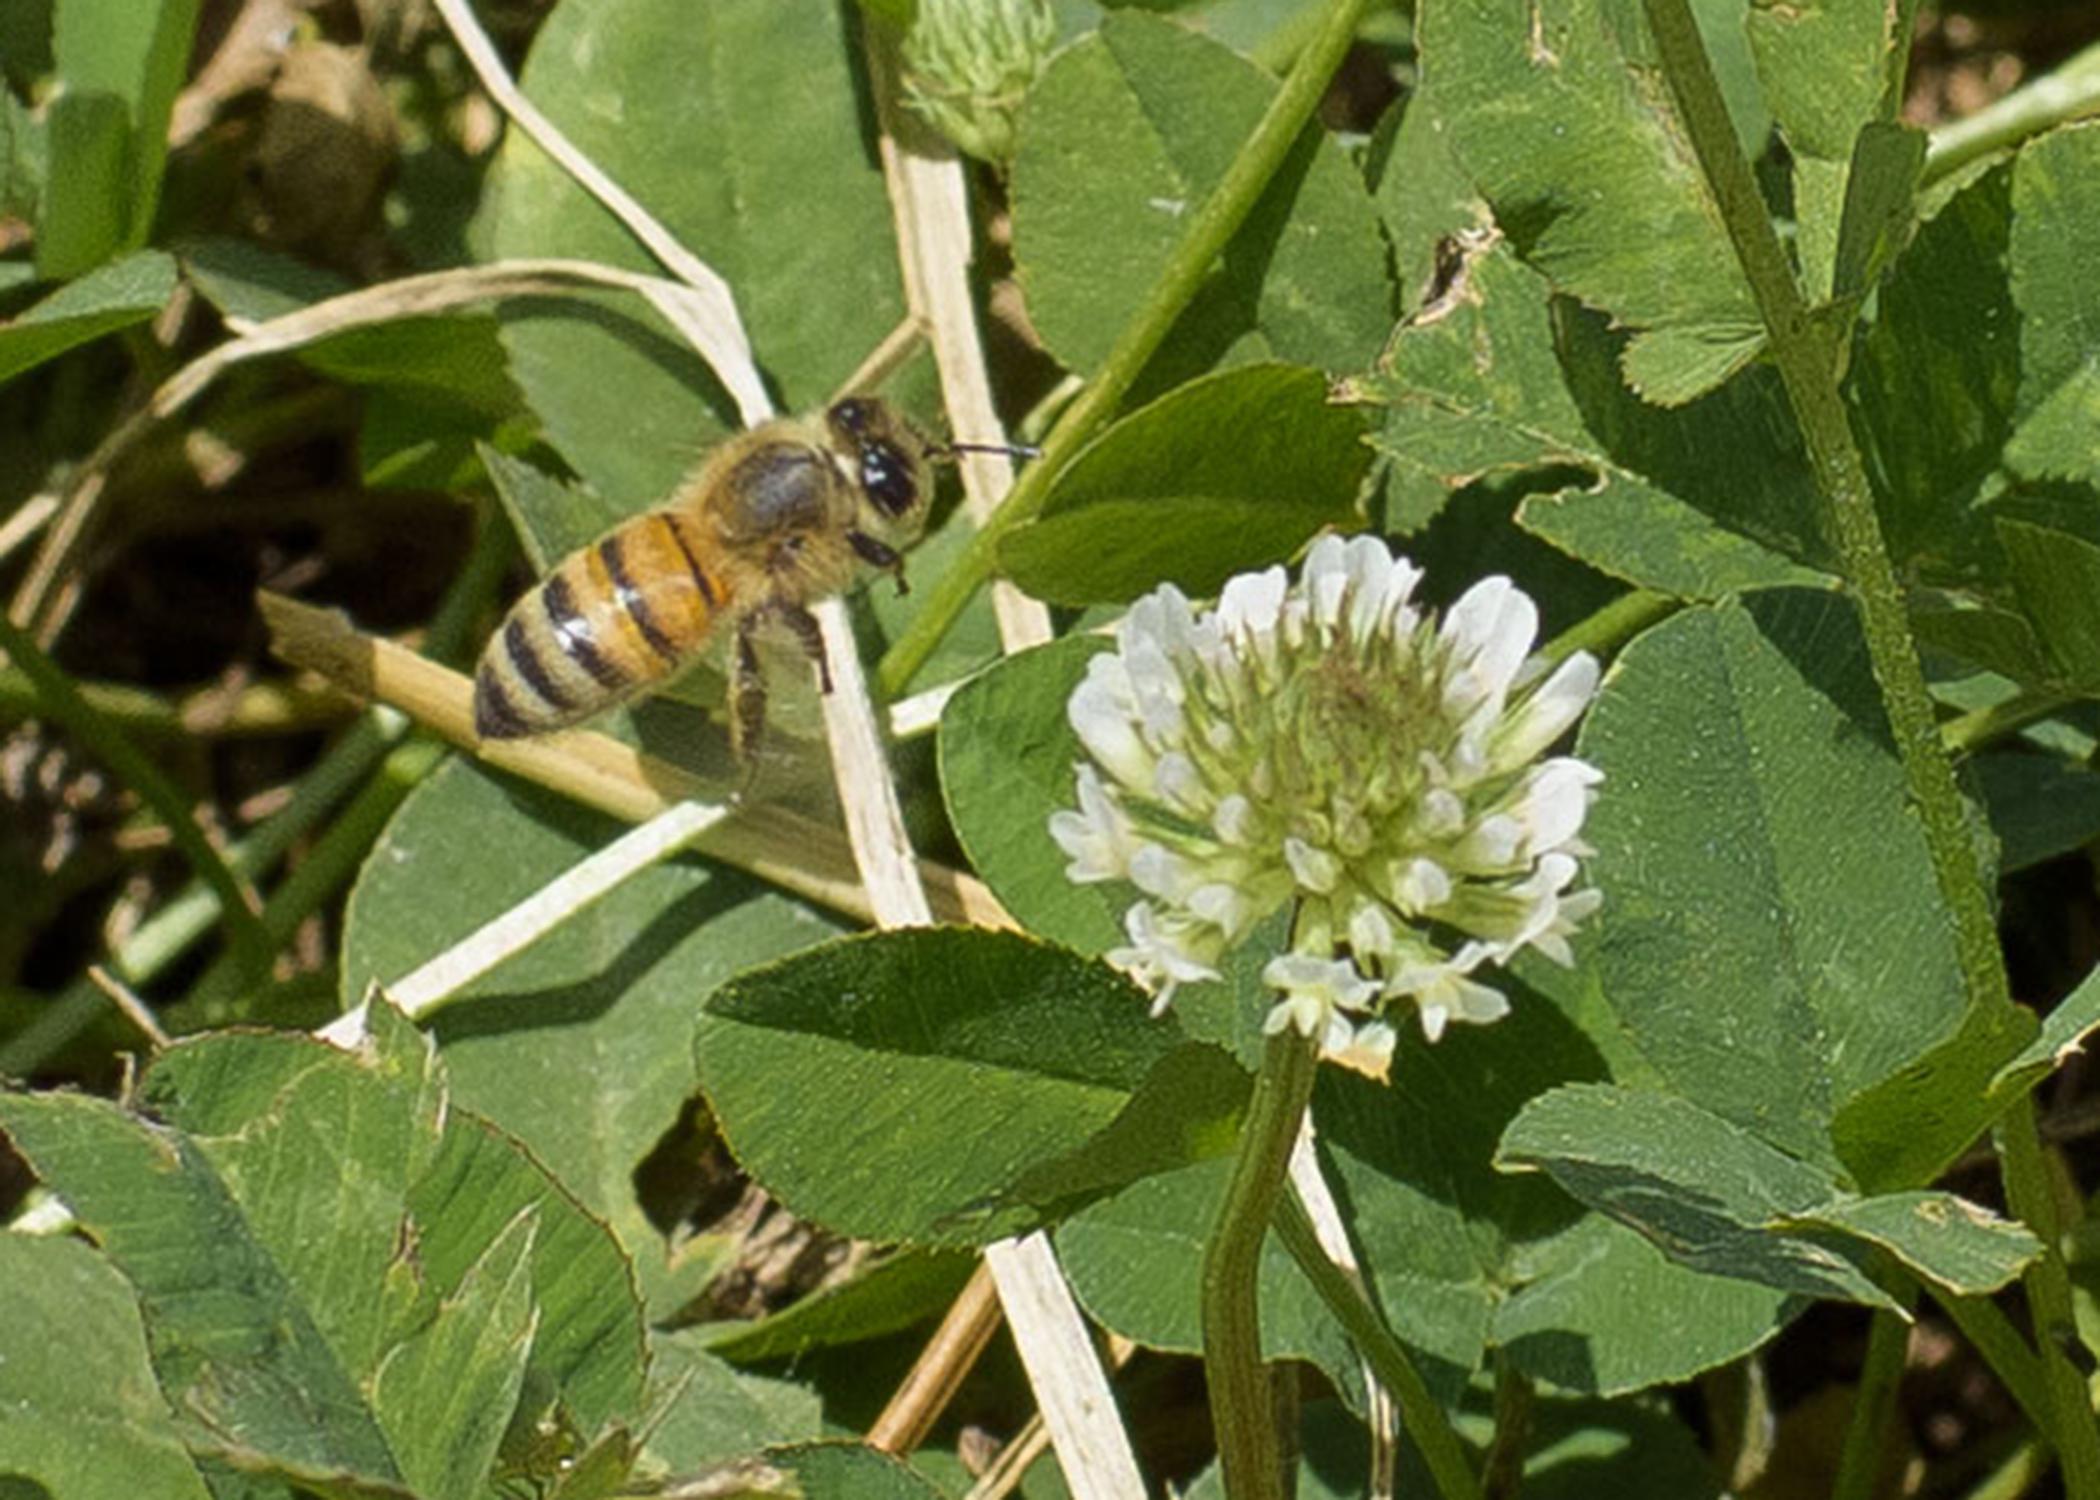 Mississippi State University participated in a recent U.S. Department of Agriculture study that looked at several herbicides’ toxicity to honeybees. (Photo by MSU Extension Service/Kevin Hudson)